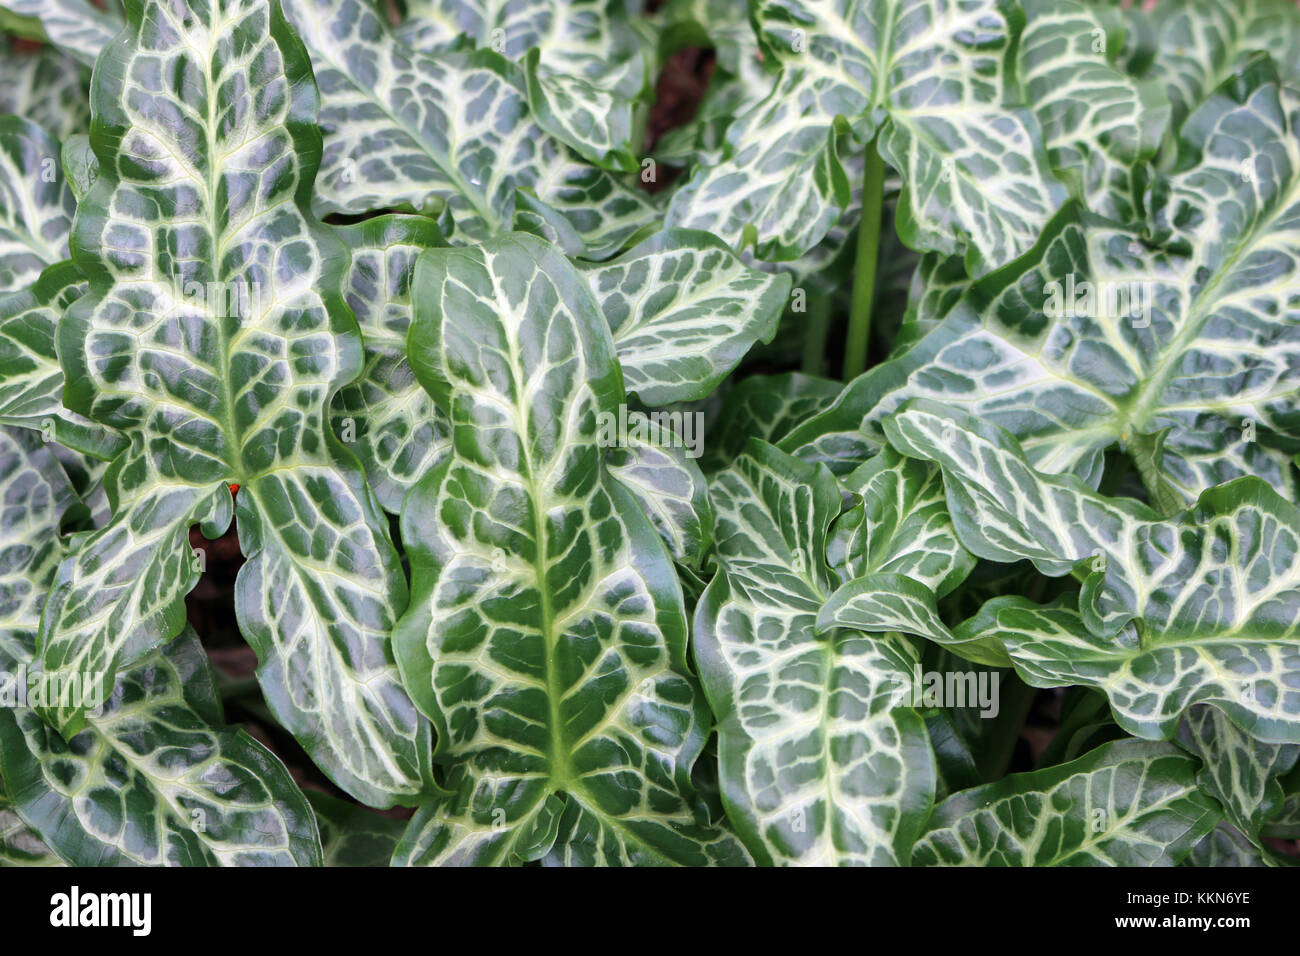 Attractive Italian arum (Arum italicum) foliage with striking pale veins on the leaves. Stock Photo